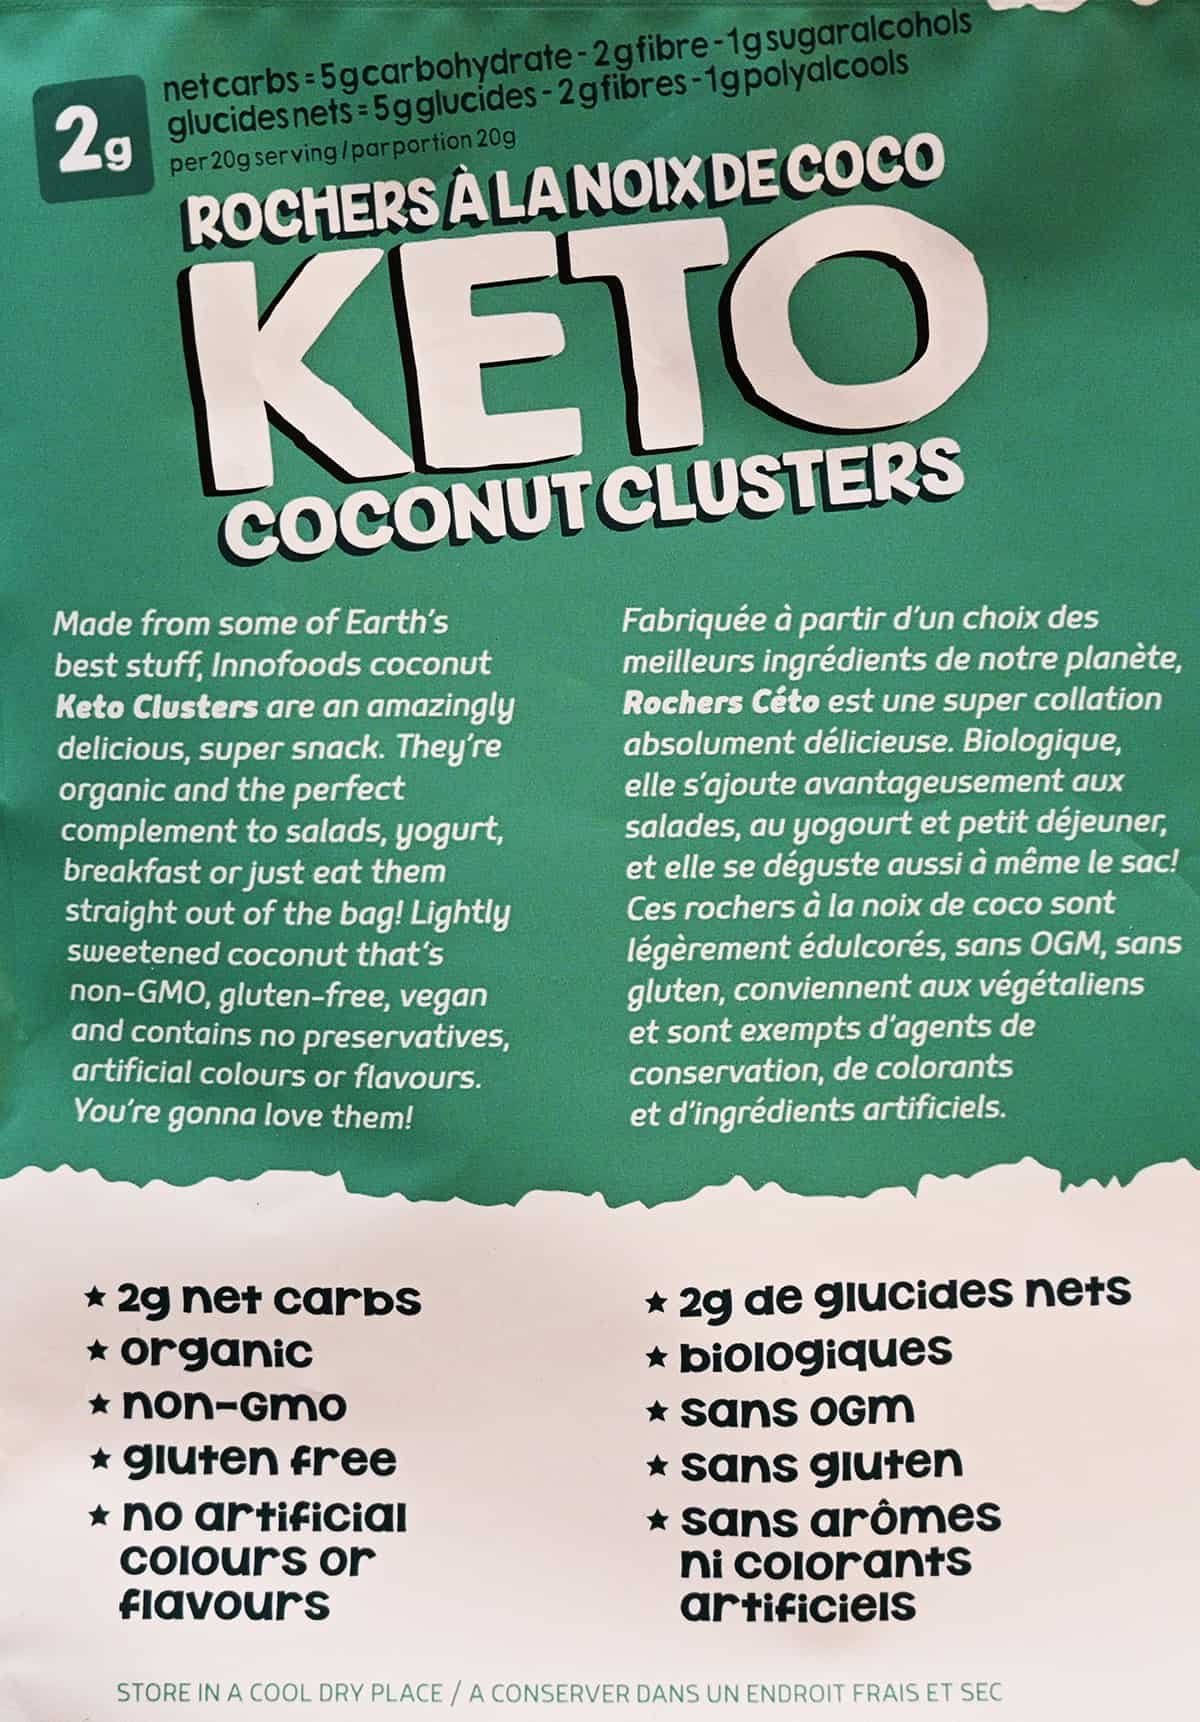 Image of the product description from the back of the bag of the coconut clusters.